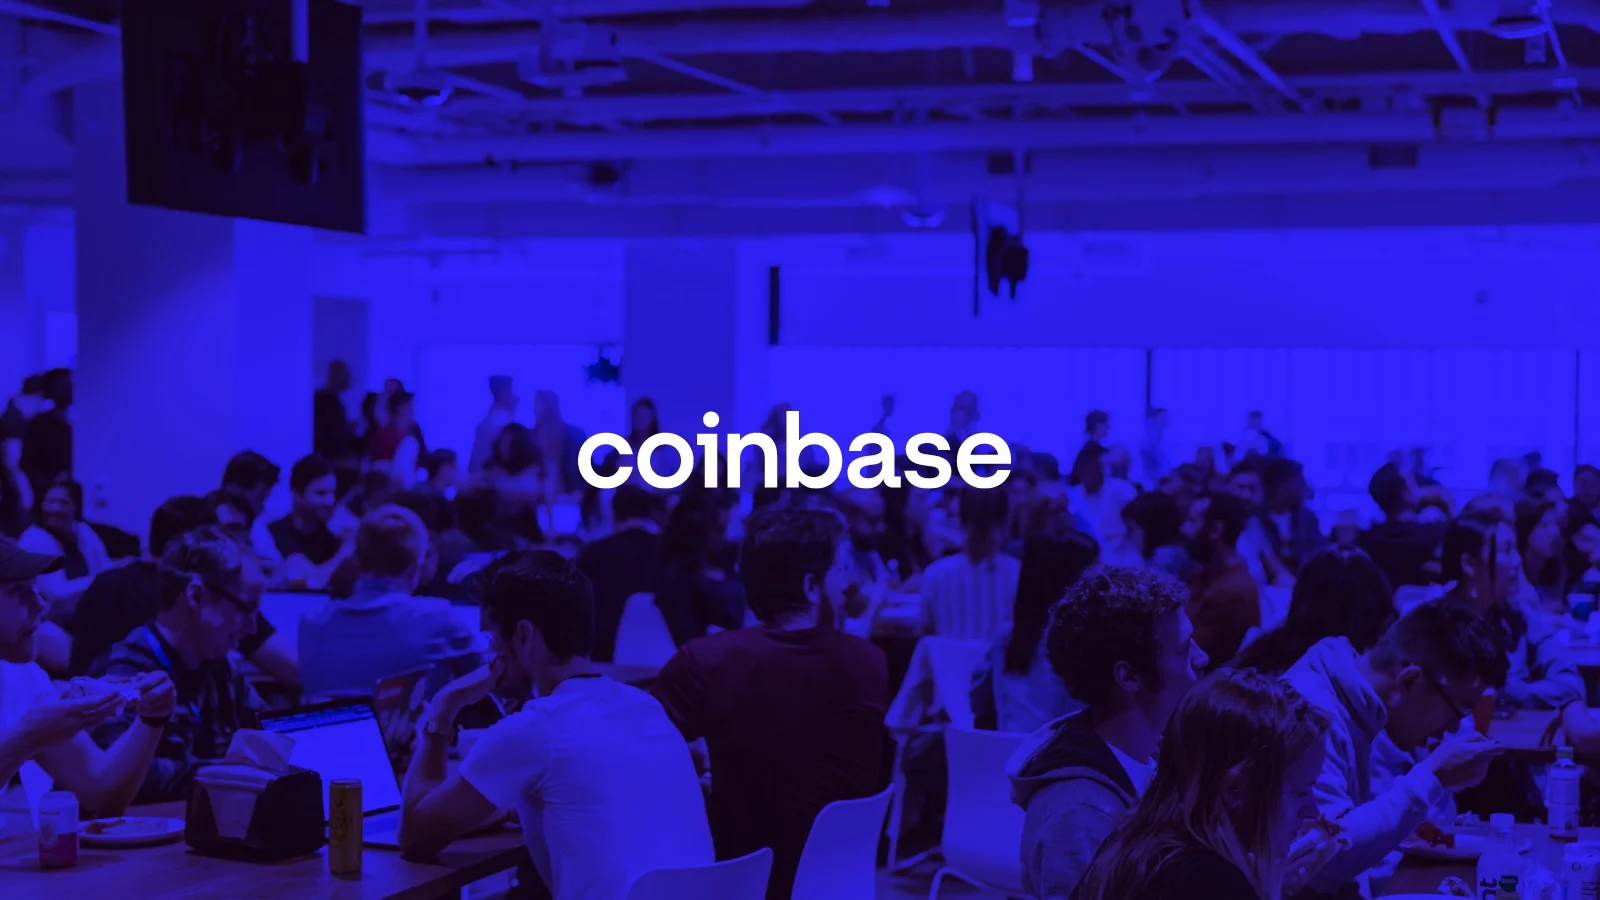 Cyberattack on Coinbase Using a Fake Sms to Hit Staff